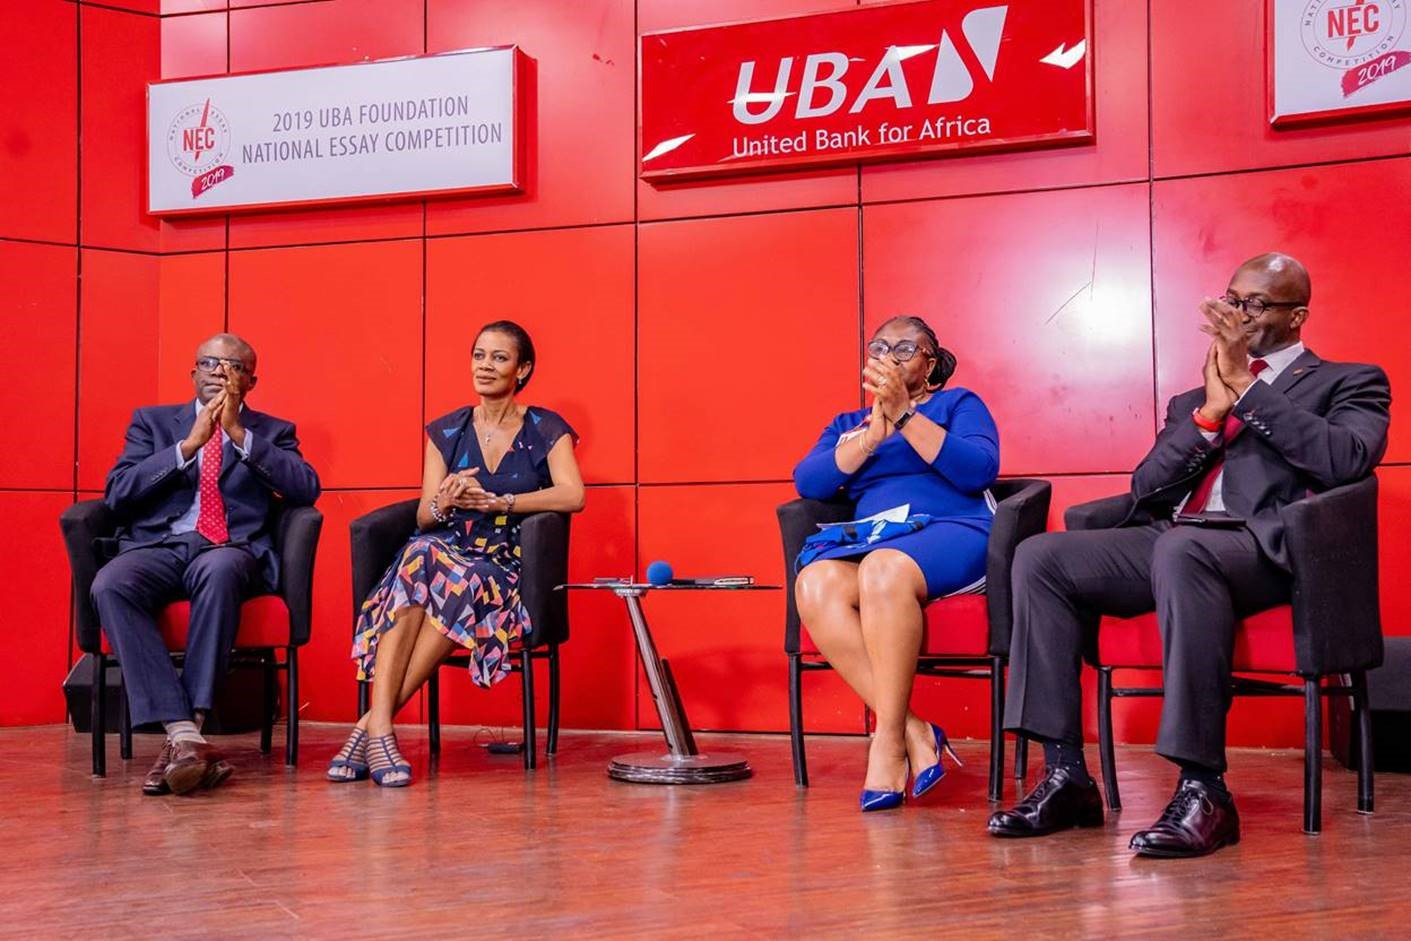 UBA now member of Partnership for Carbon Accounting Financials